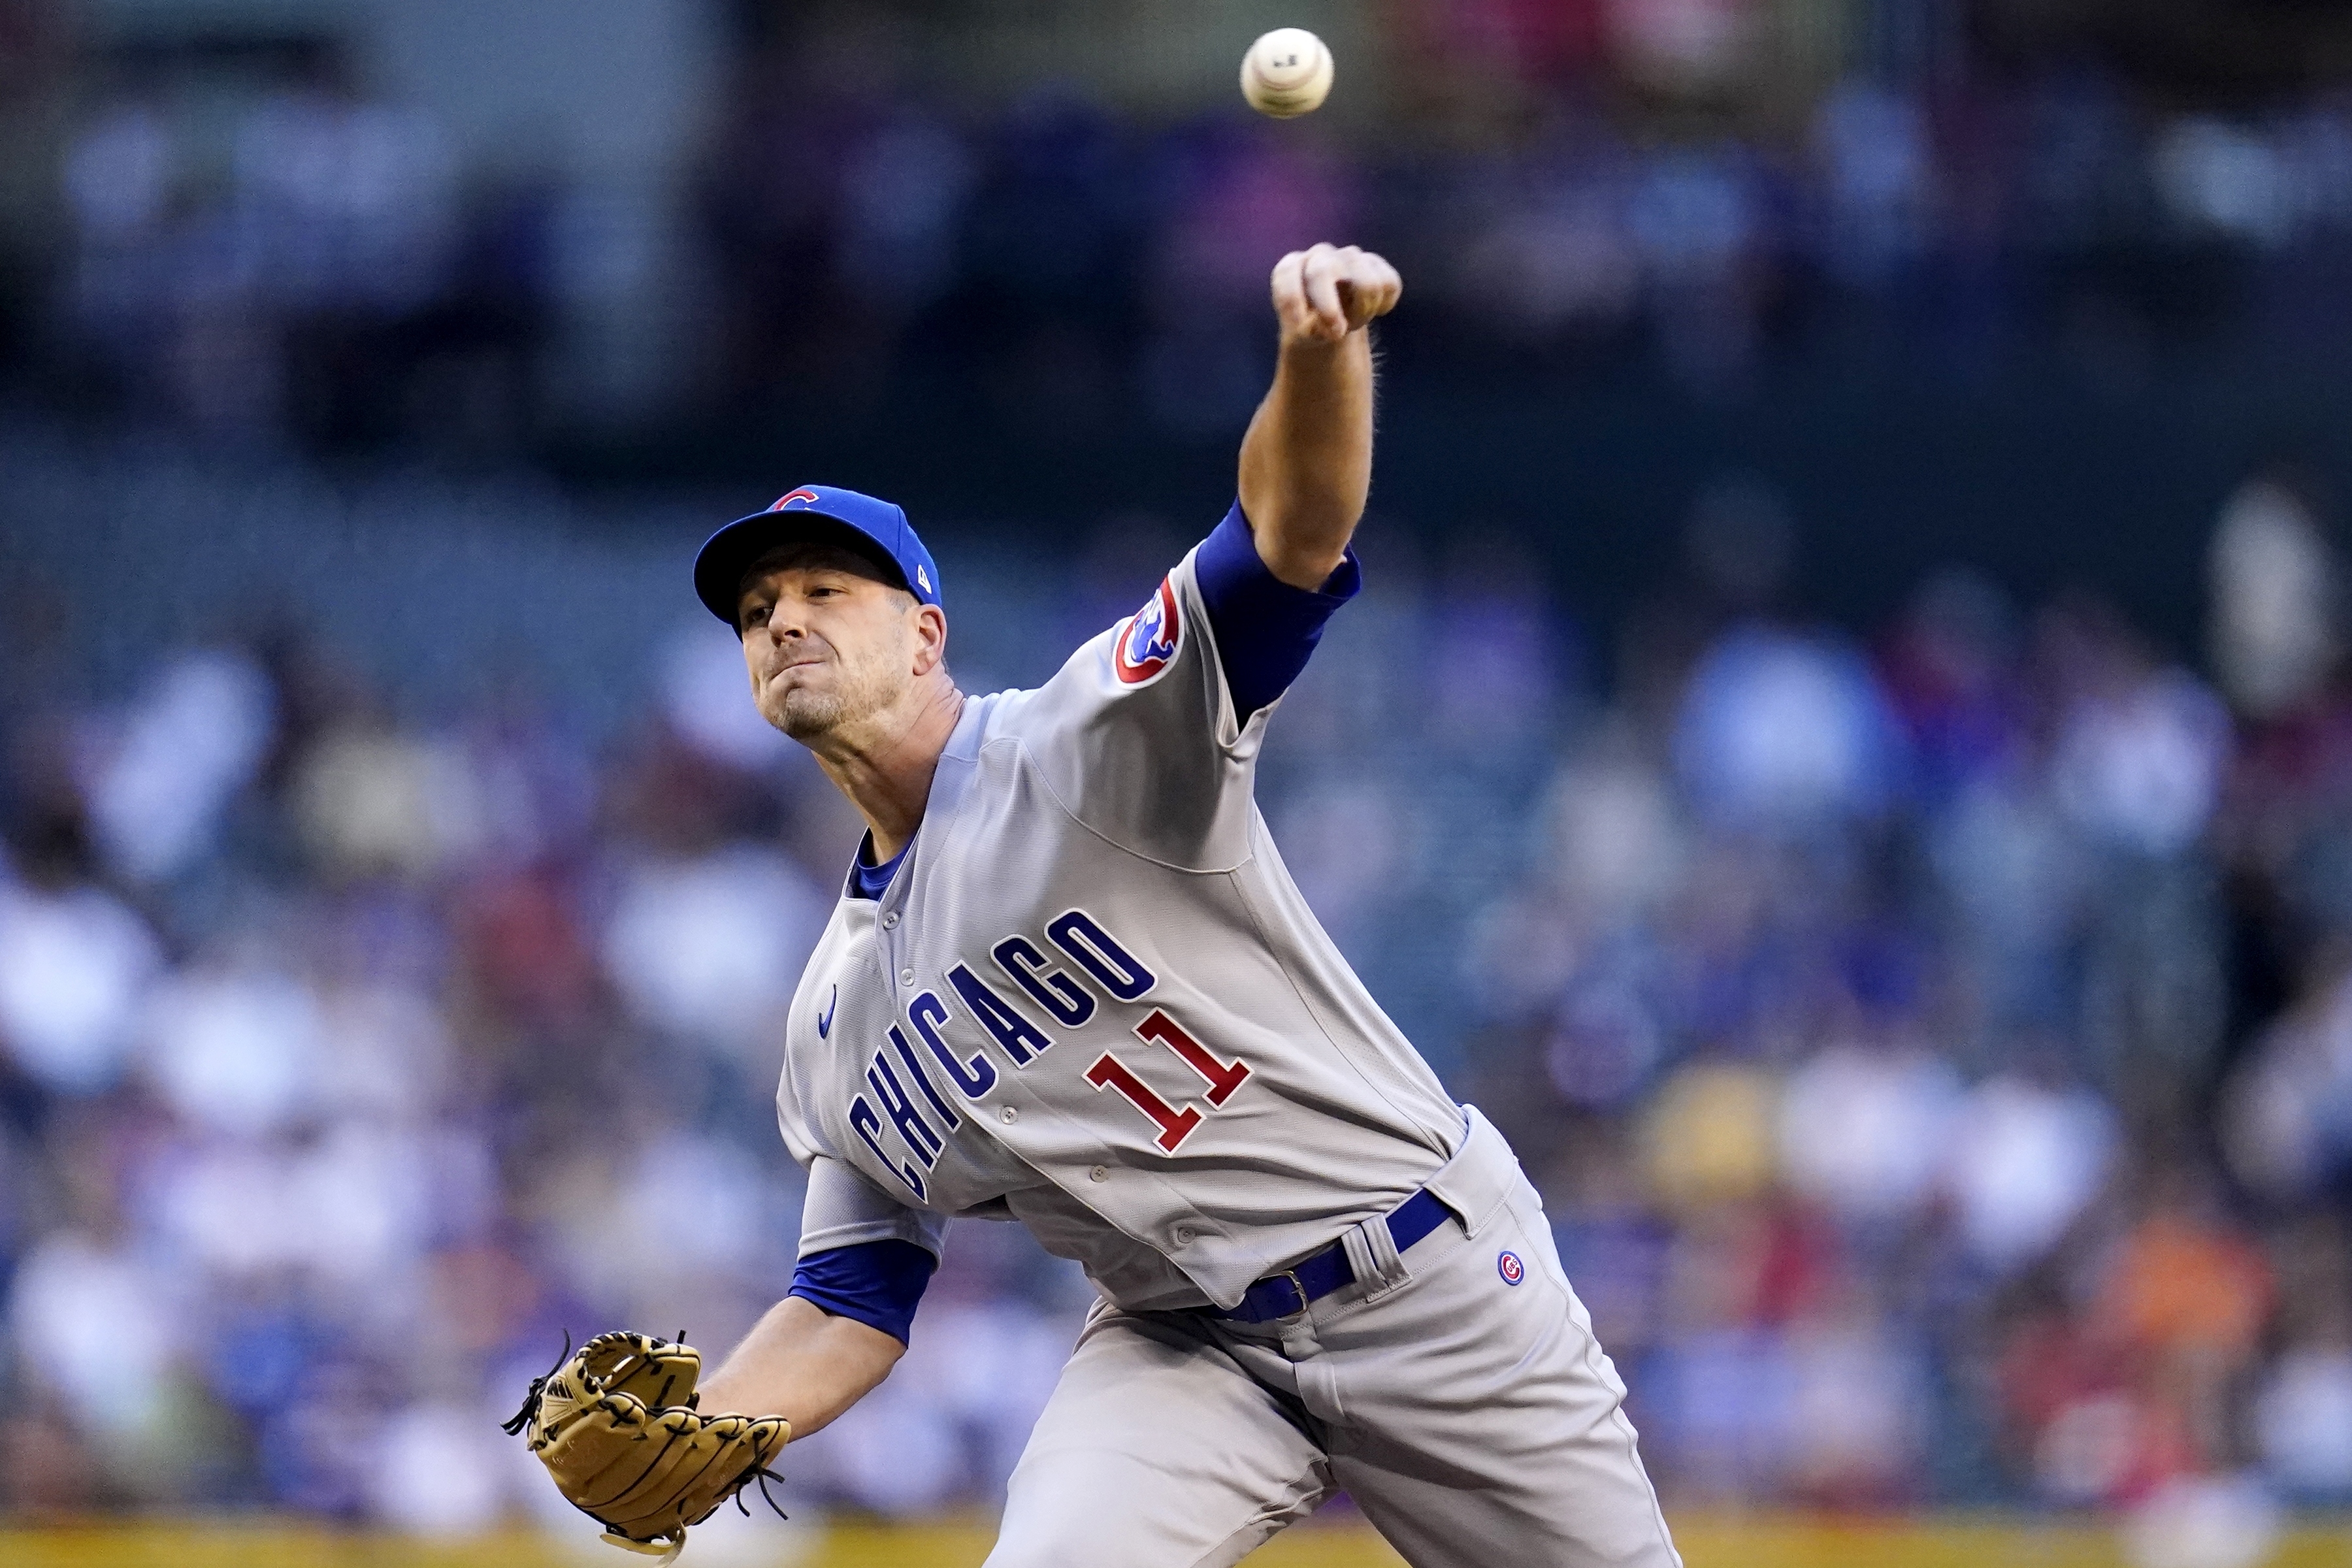 Cubs' Drew Smyly goes 5 innings vs. Padres after long 4th – NBC